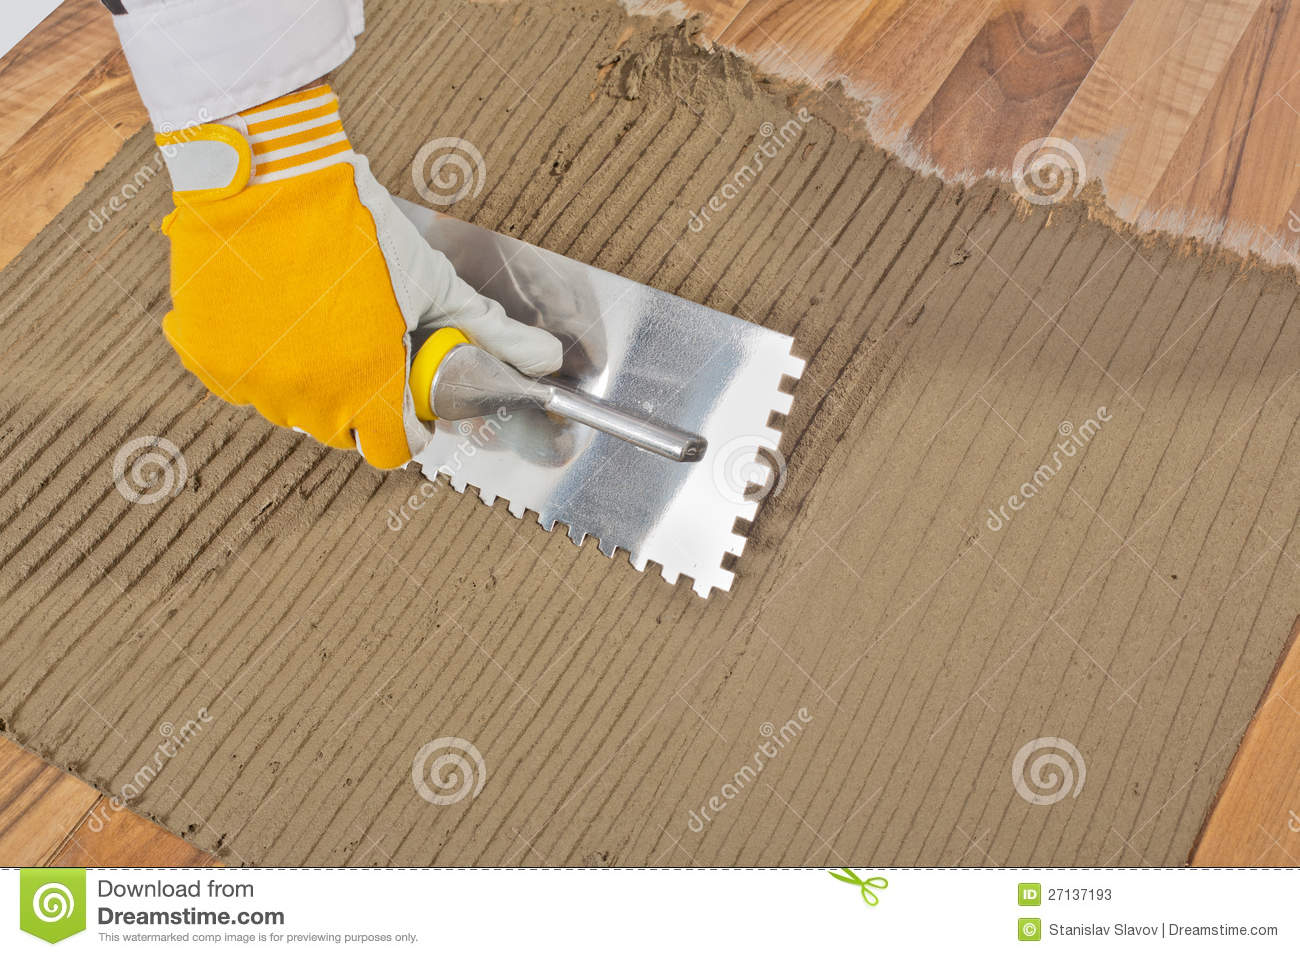 Worker Applied Tile Adhesive On Old Wooden Floor Stock Photos   Image